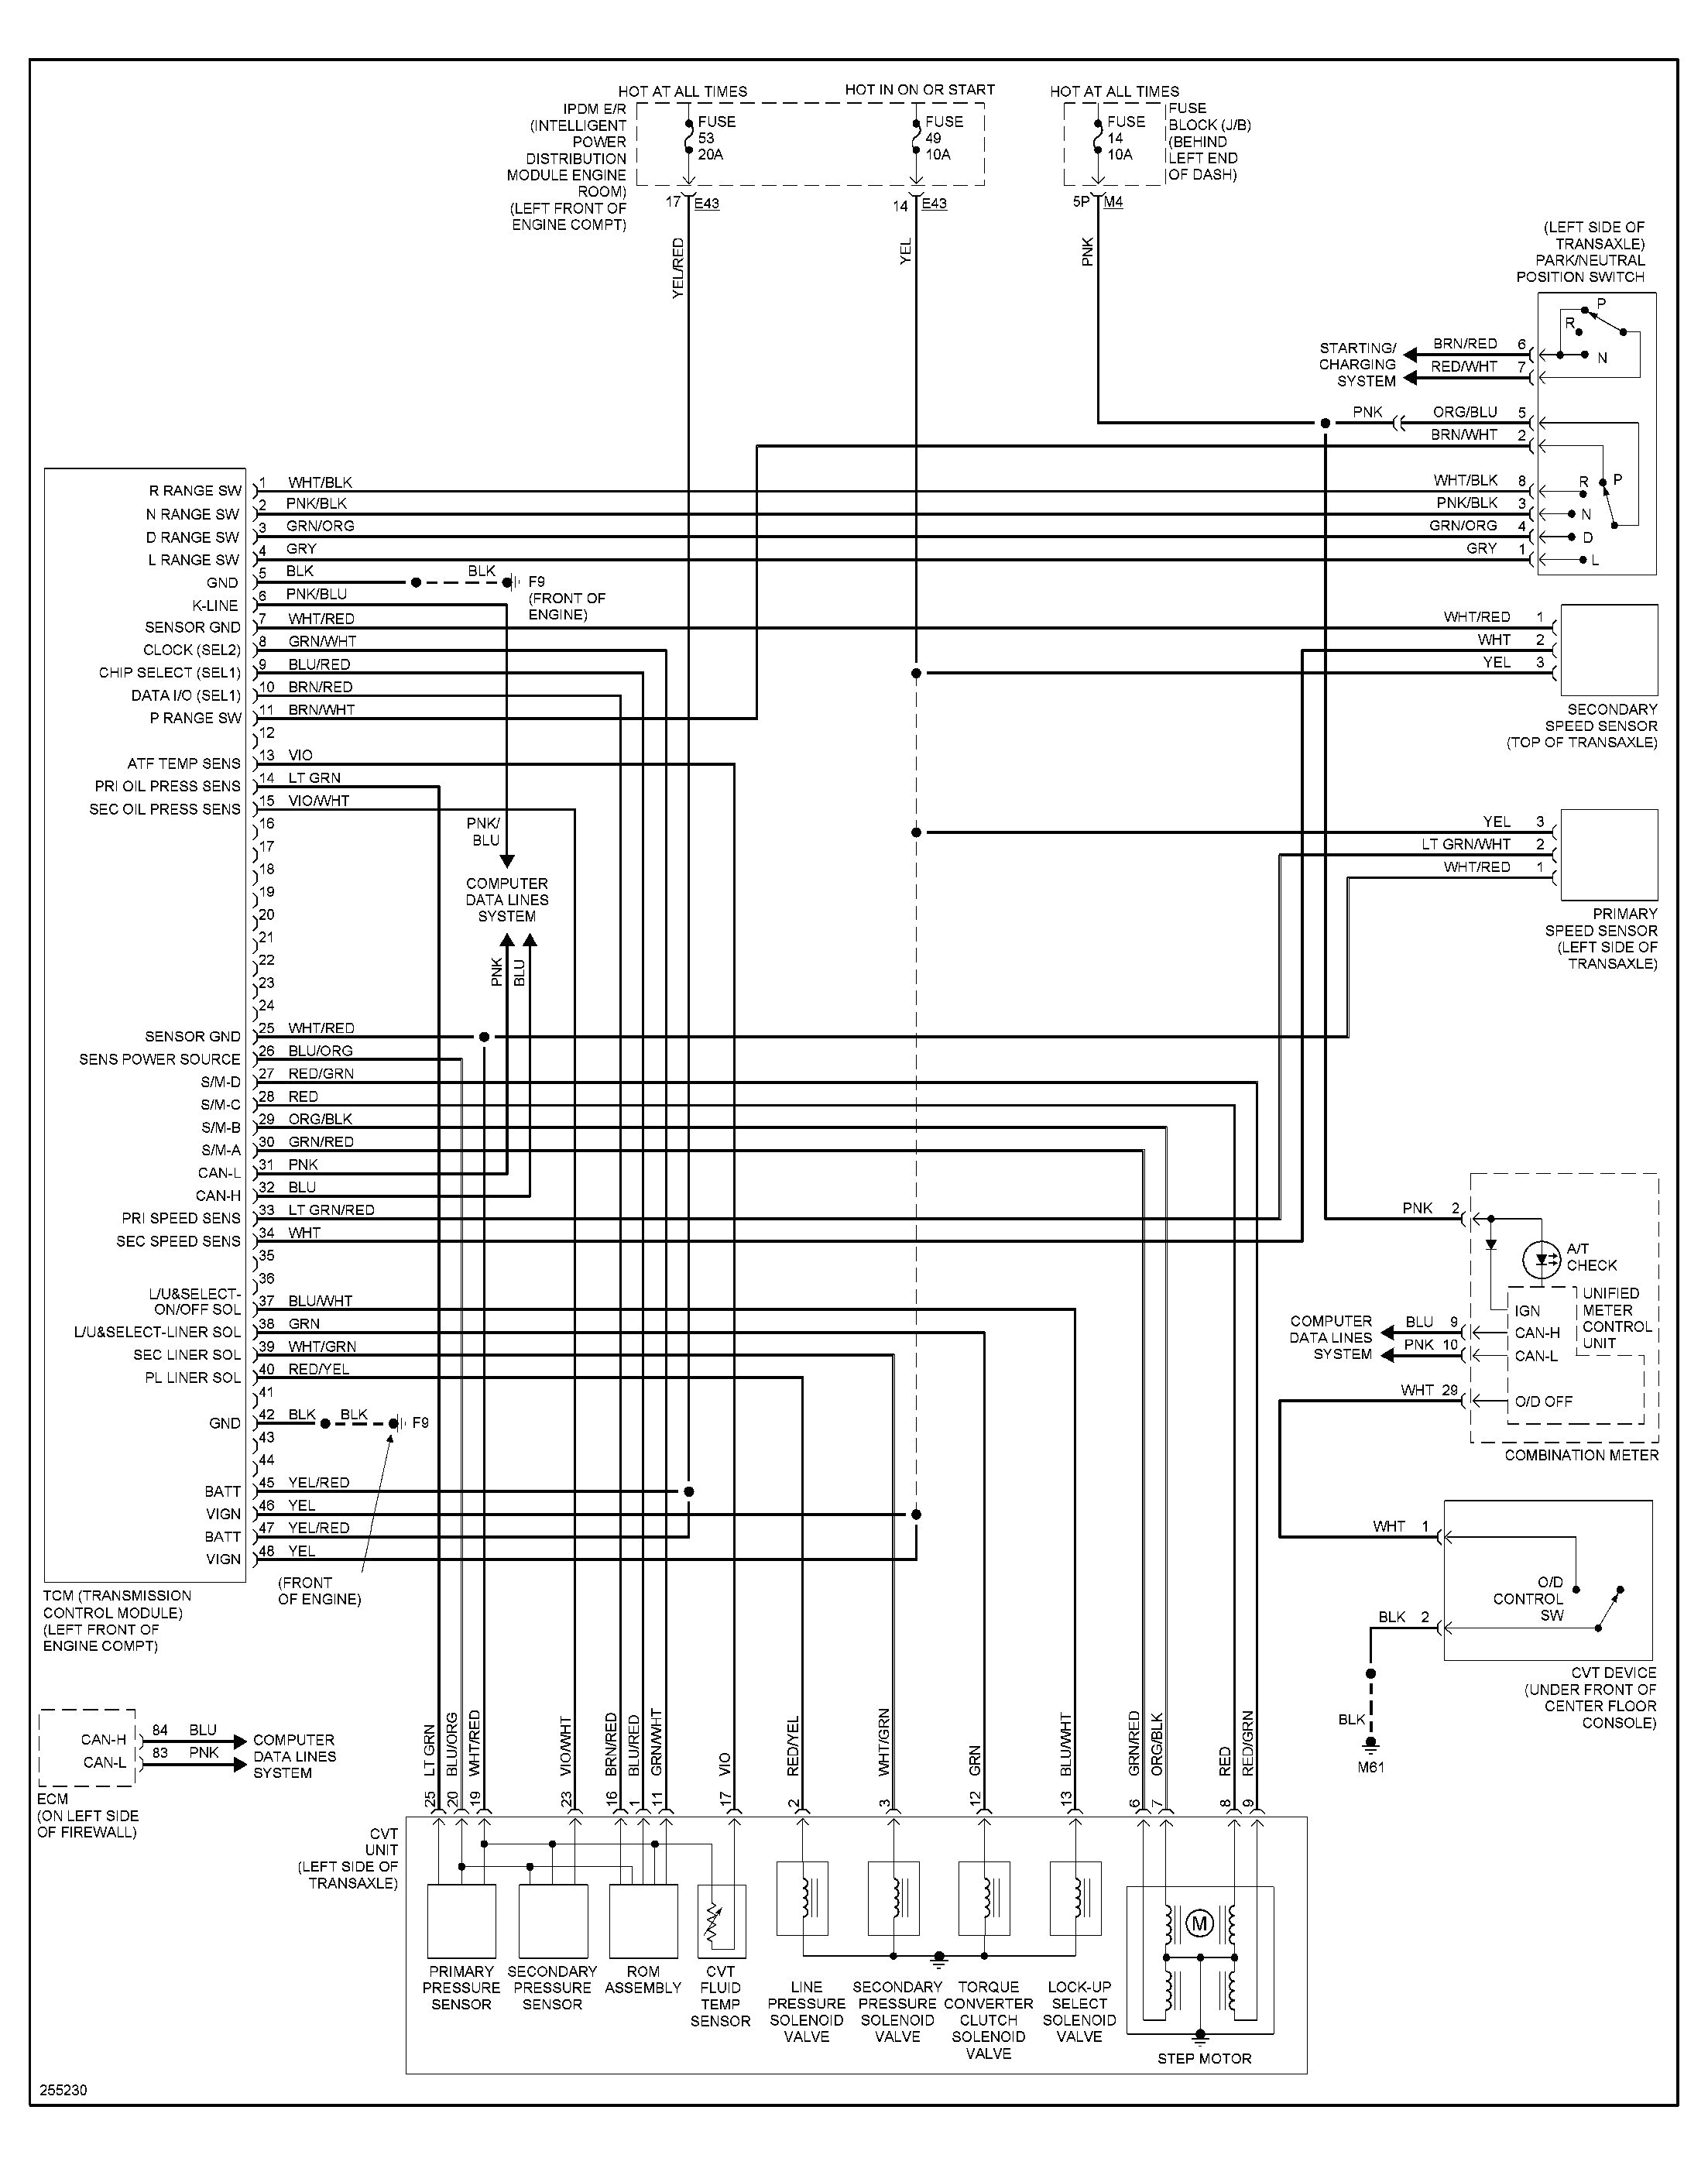 1998 nissan altima engine diagram 98 sentra engine diagram another blog about wiring diagram e280a2 of 1998 nissan altima engine diagram jpg